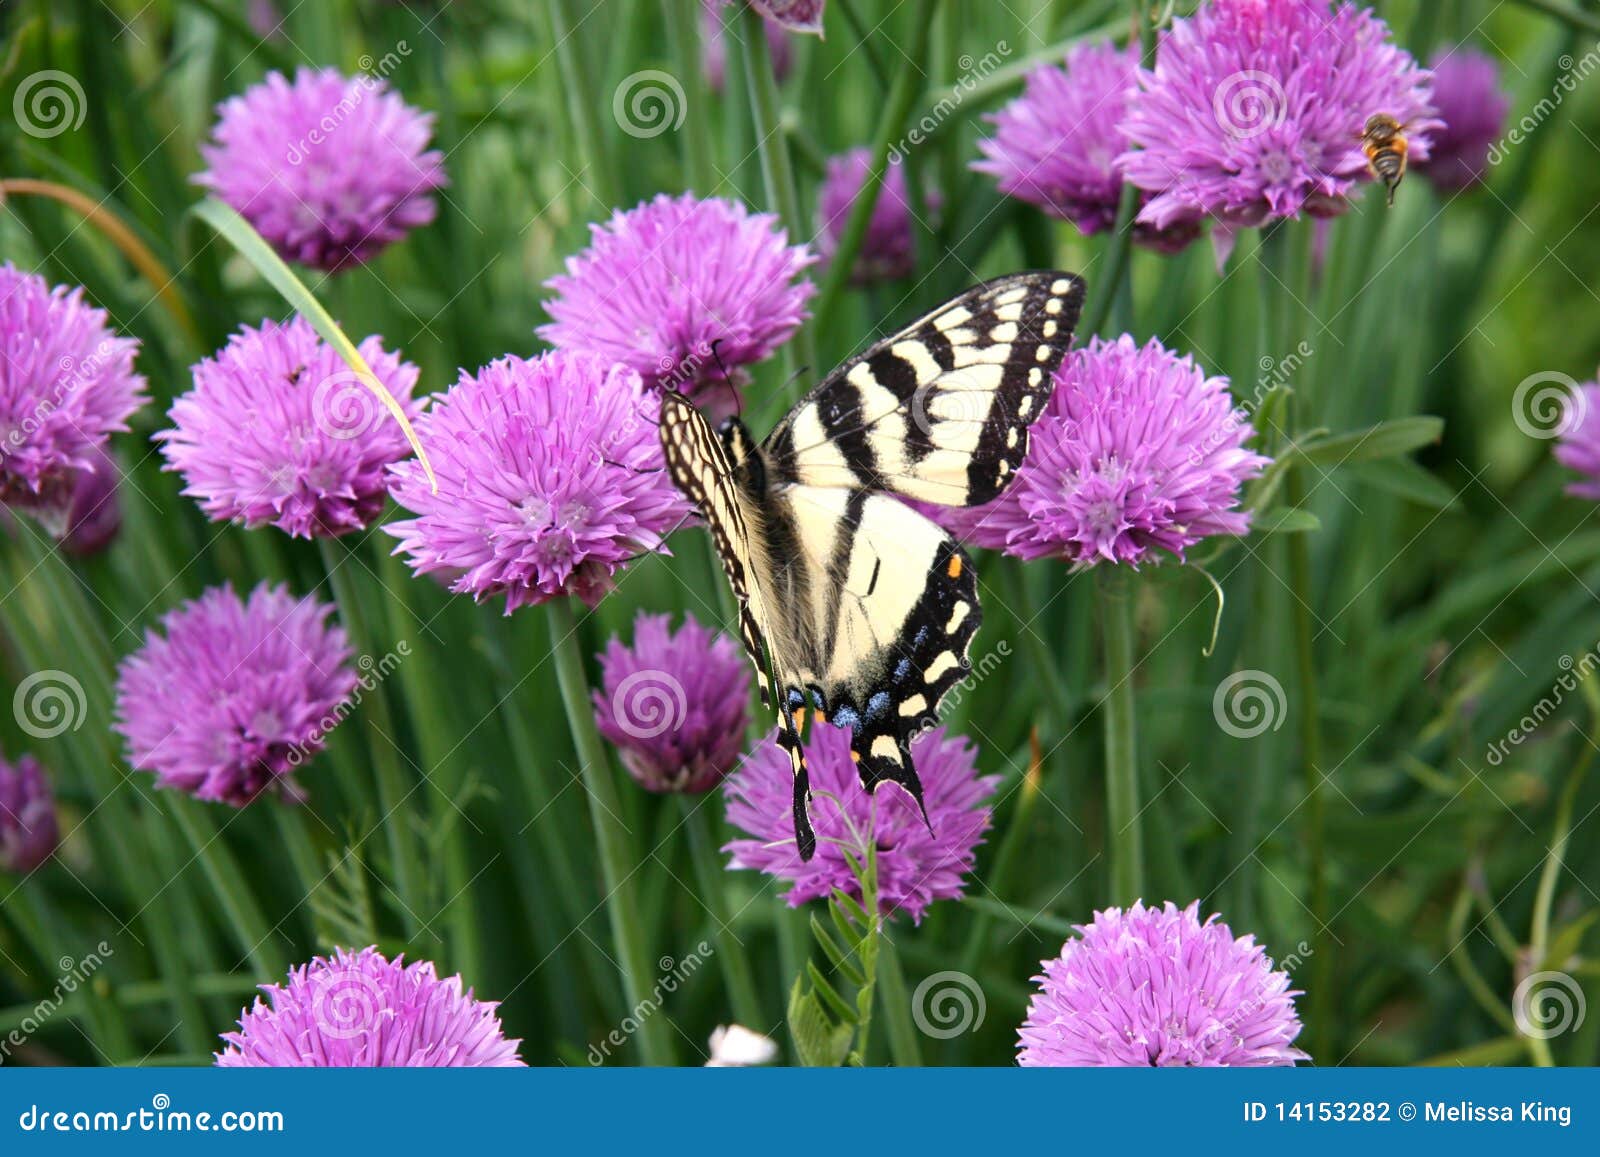 Purple Butterfly Pictures On Flowers